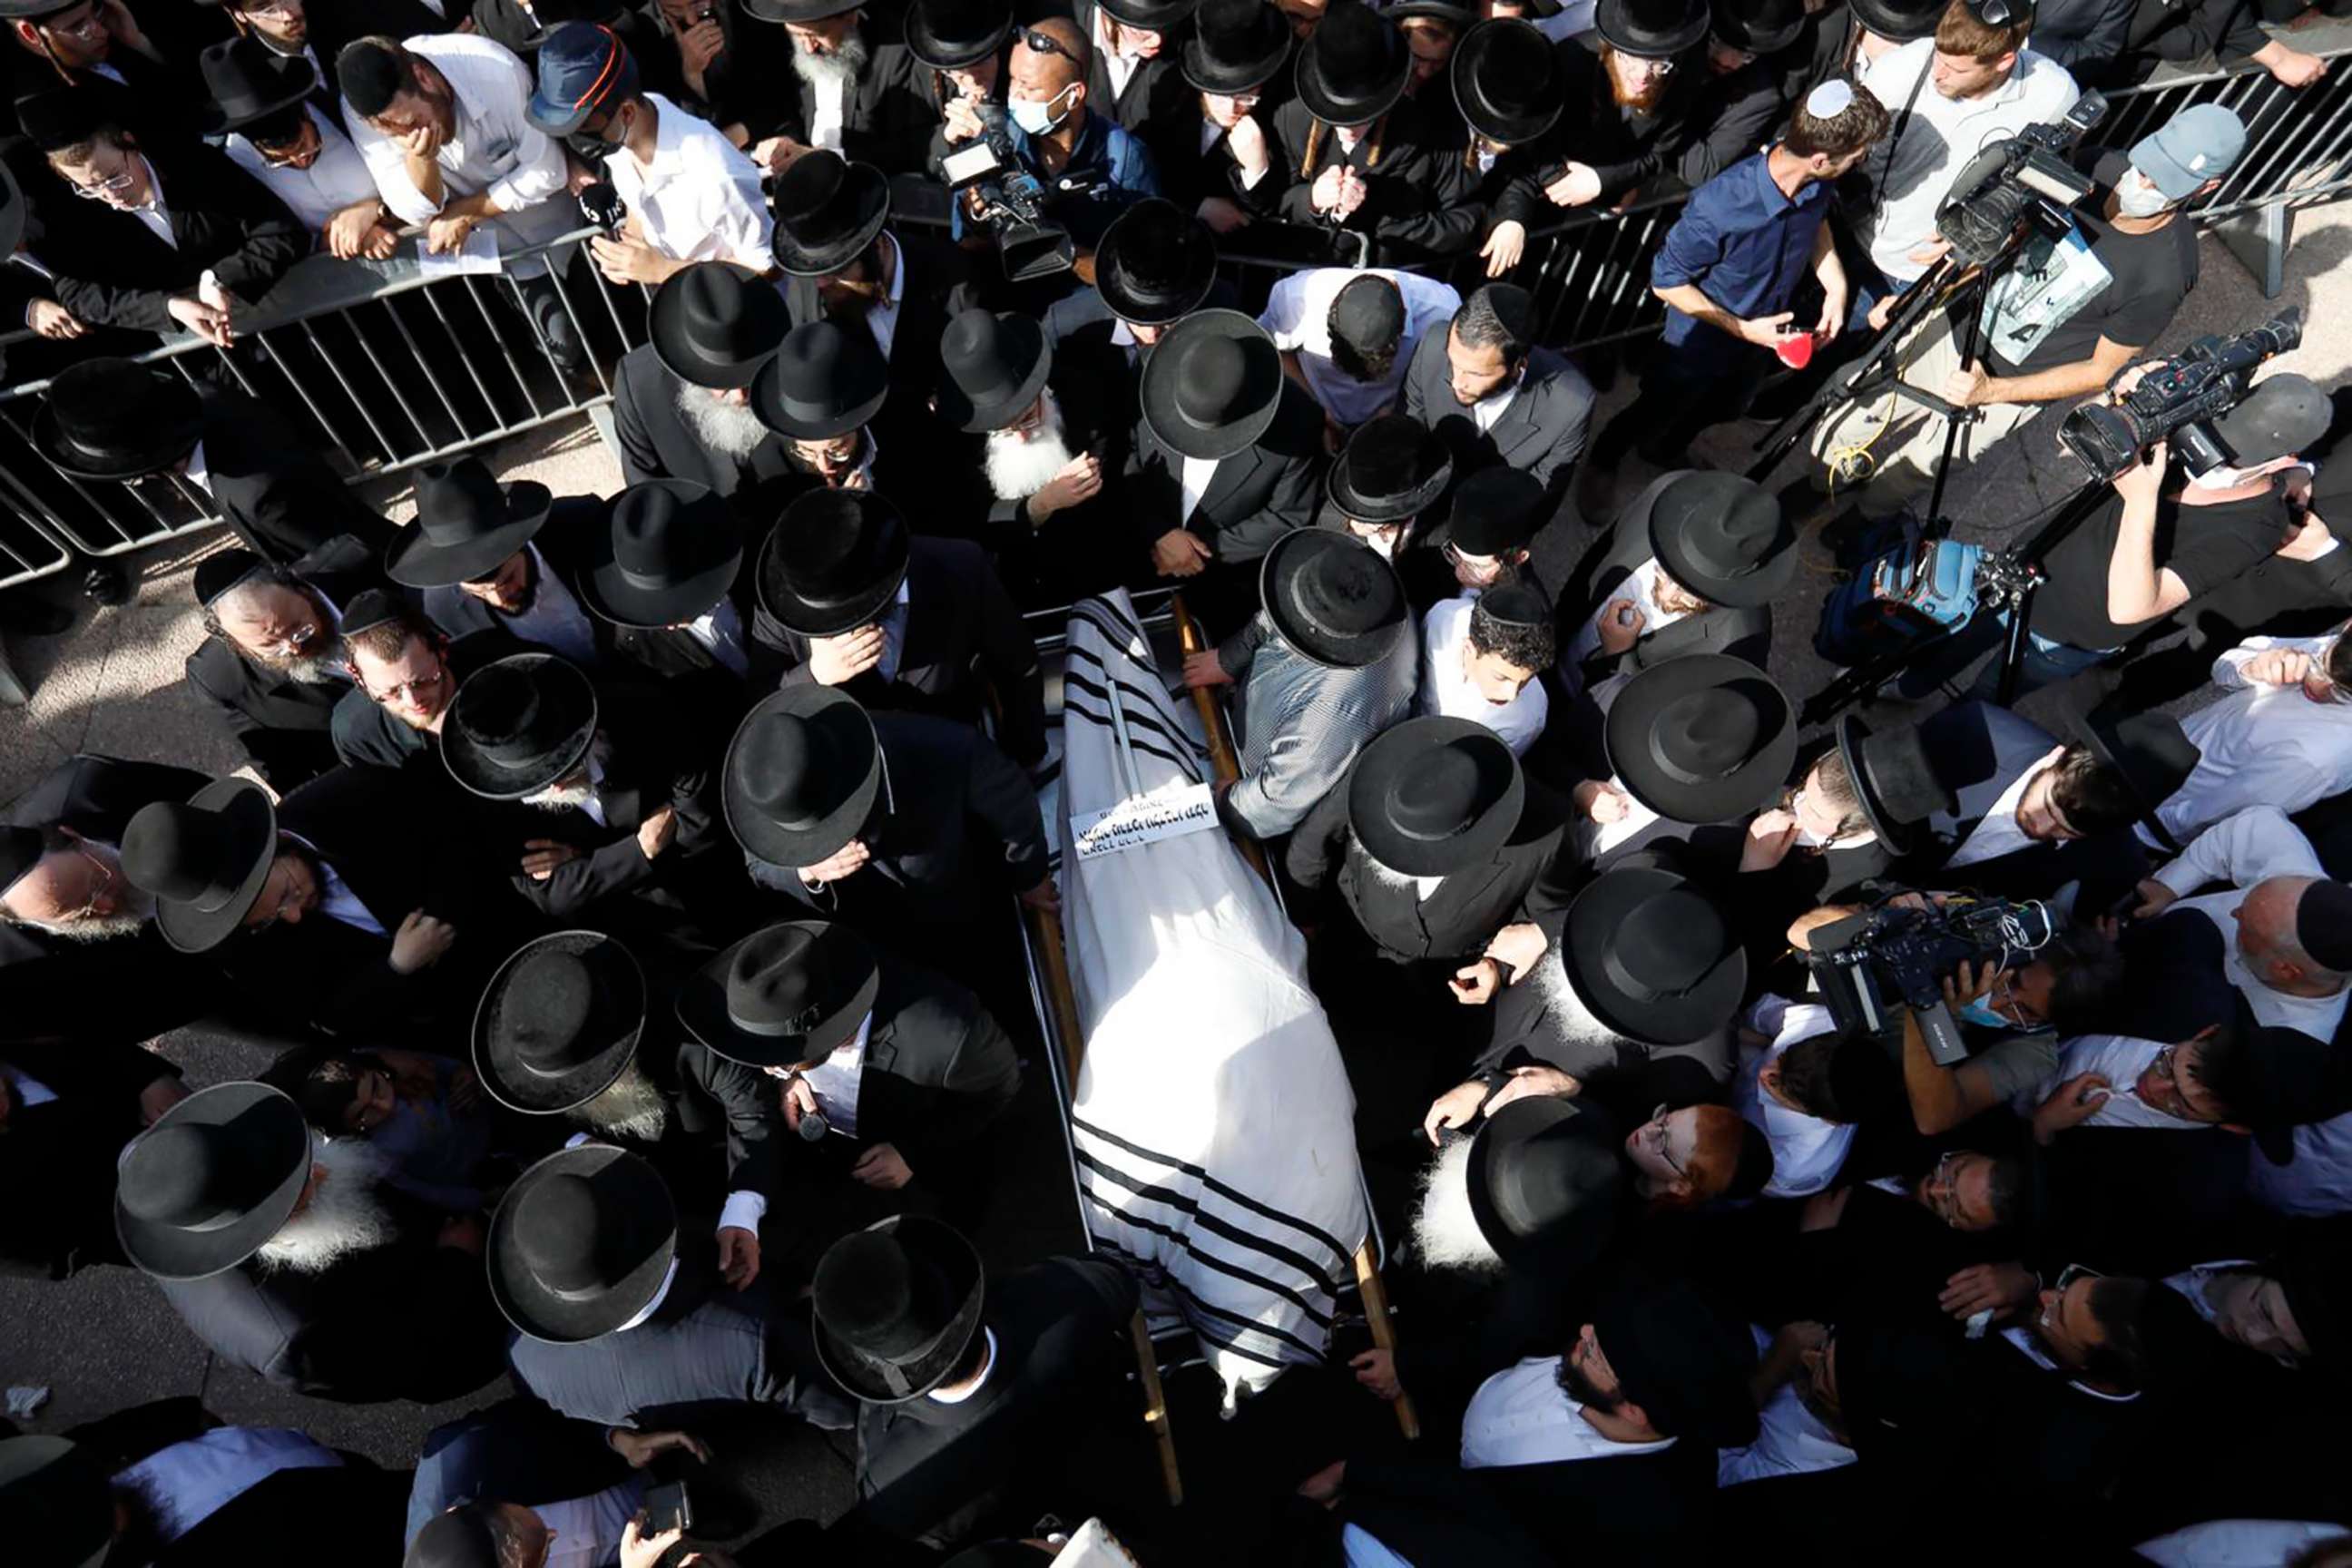 PHOTO: Mourners carry the body of Rabbi Eliezer Goldberg, who died in the stampeded during religious celebrations at Mt. Meron in northern Israel, at his funeral in Jerusalem, April 30, 2021.